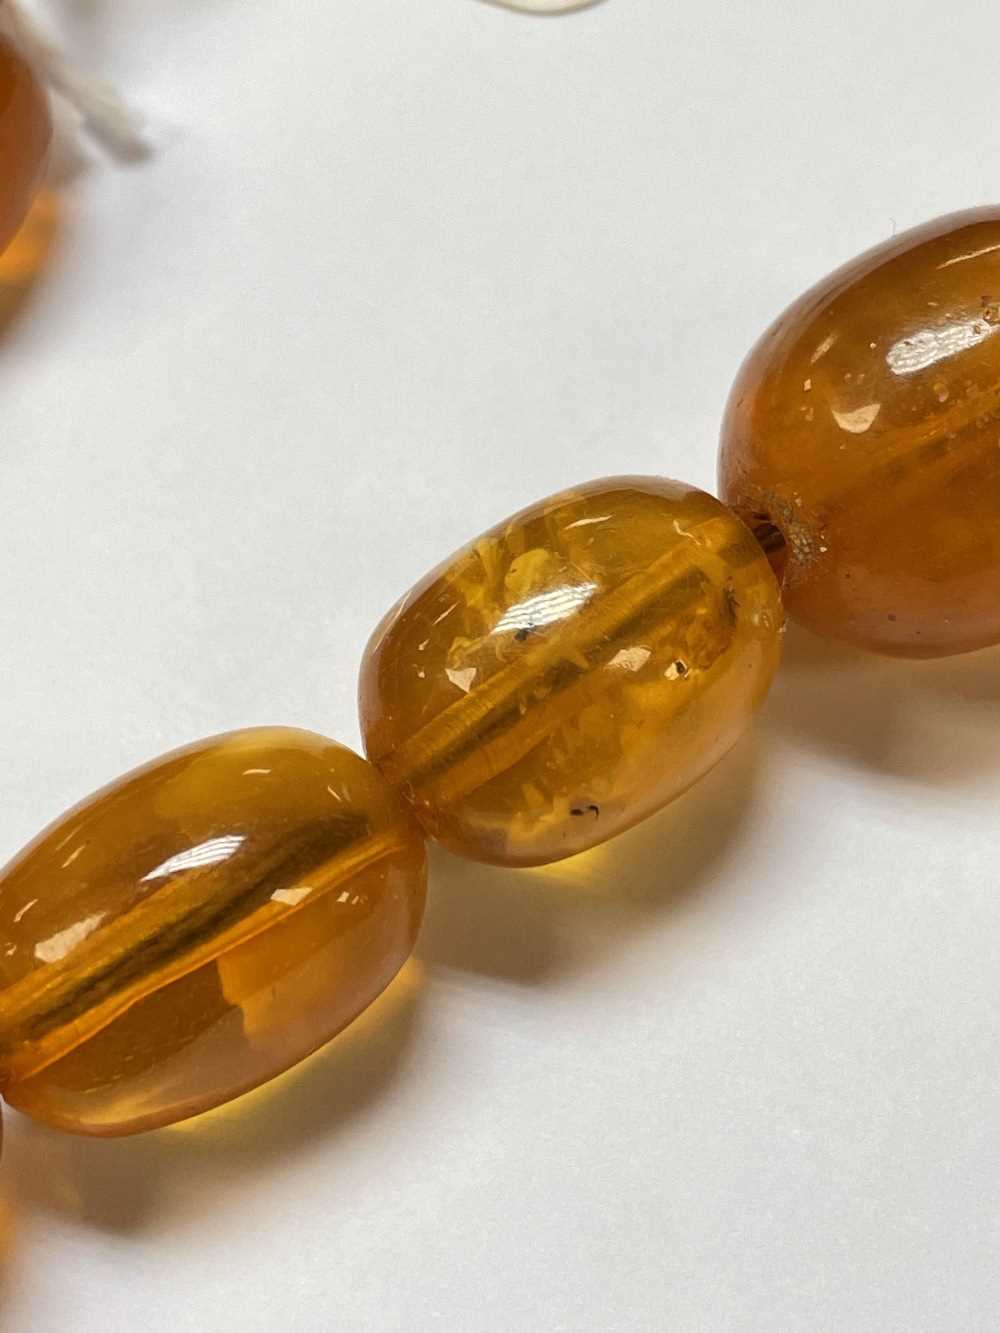 SINGLE STRAND AMBER BEAD NECKLACE, beads 13mm to 20mm, approx gross wt. 55gms - Image 13 of 13